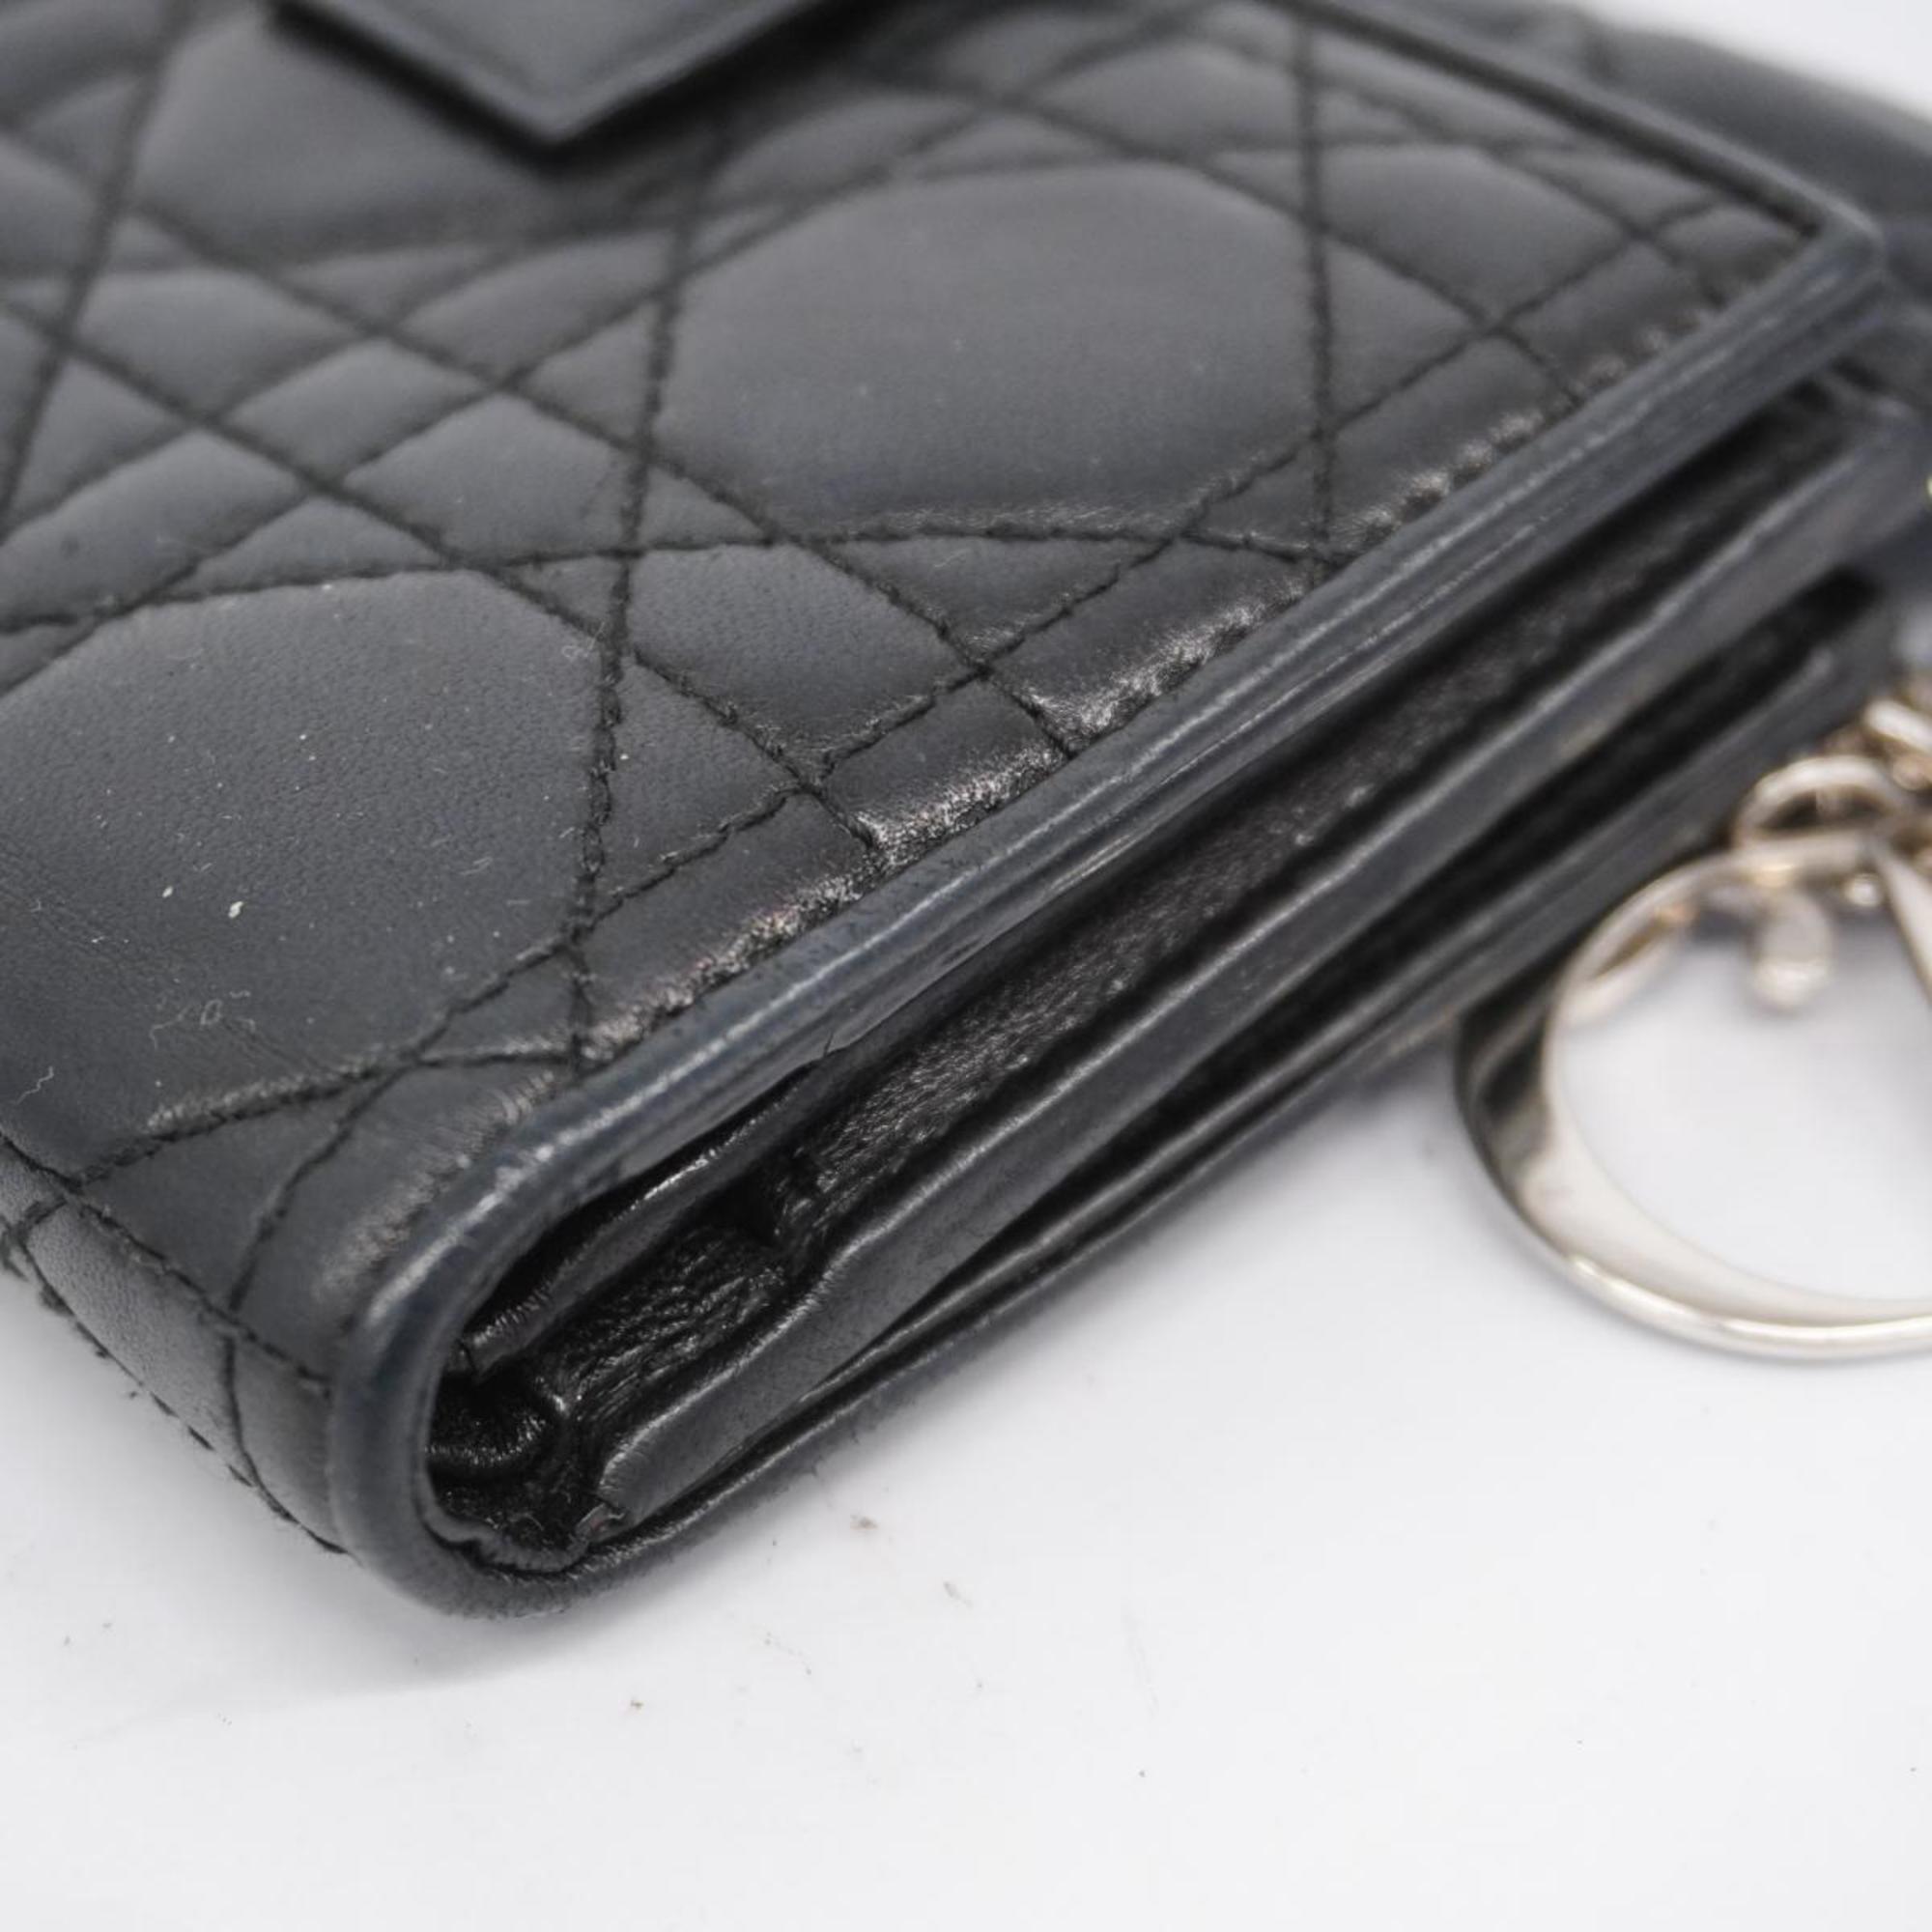 Christian Dior Wallet Cannage Leather Black Women's